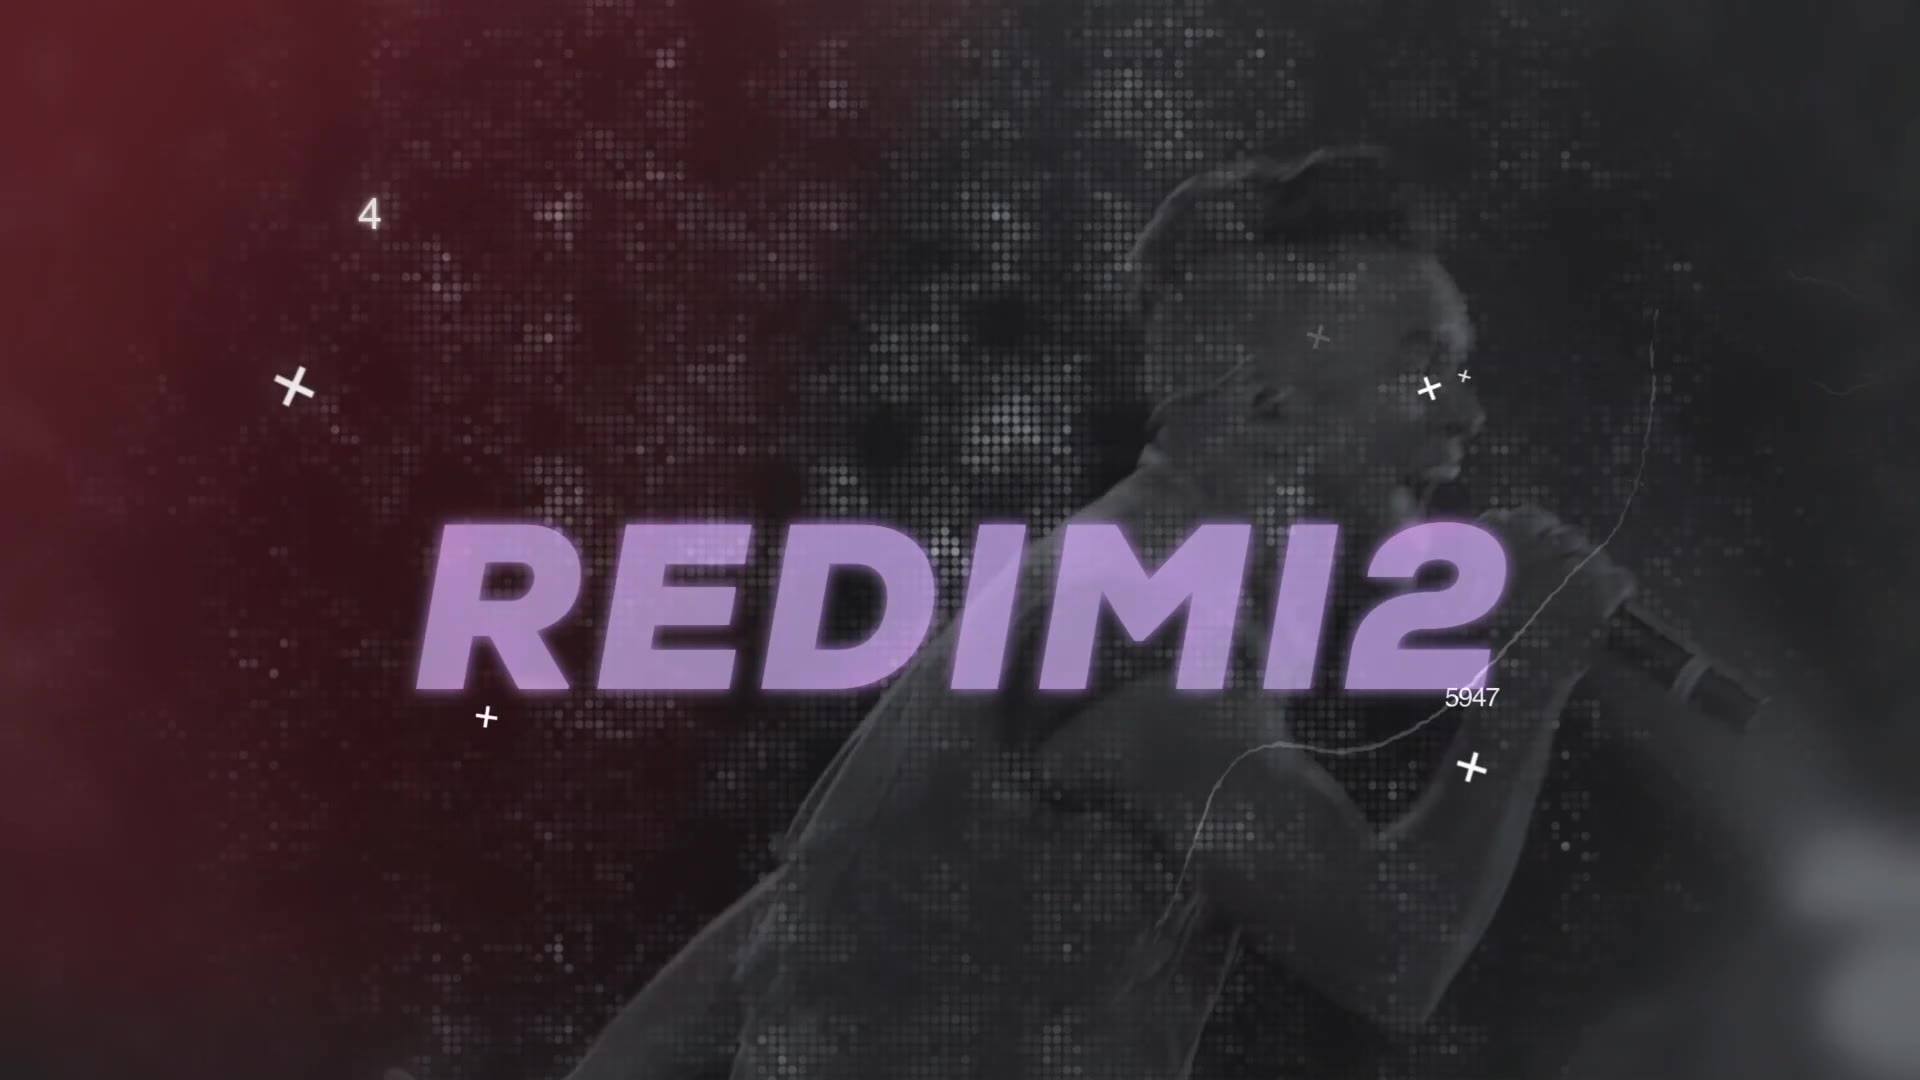 Redimi2 Oficial Added A Cover Video